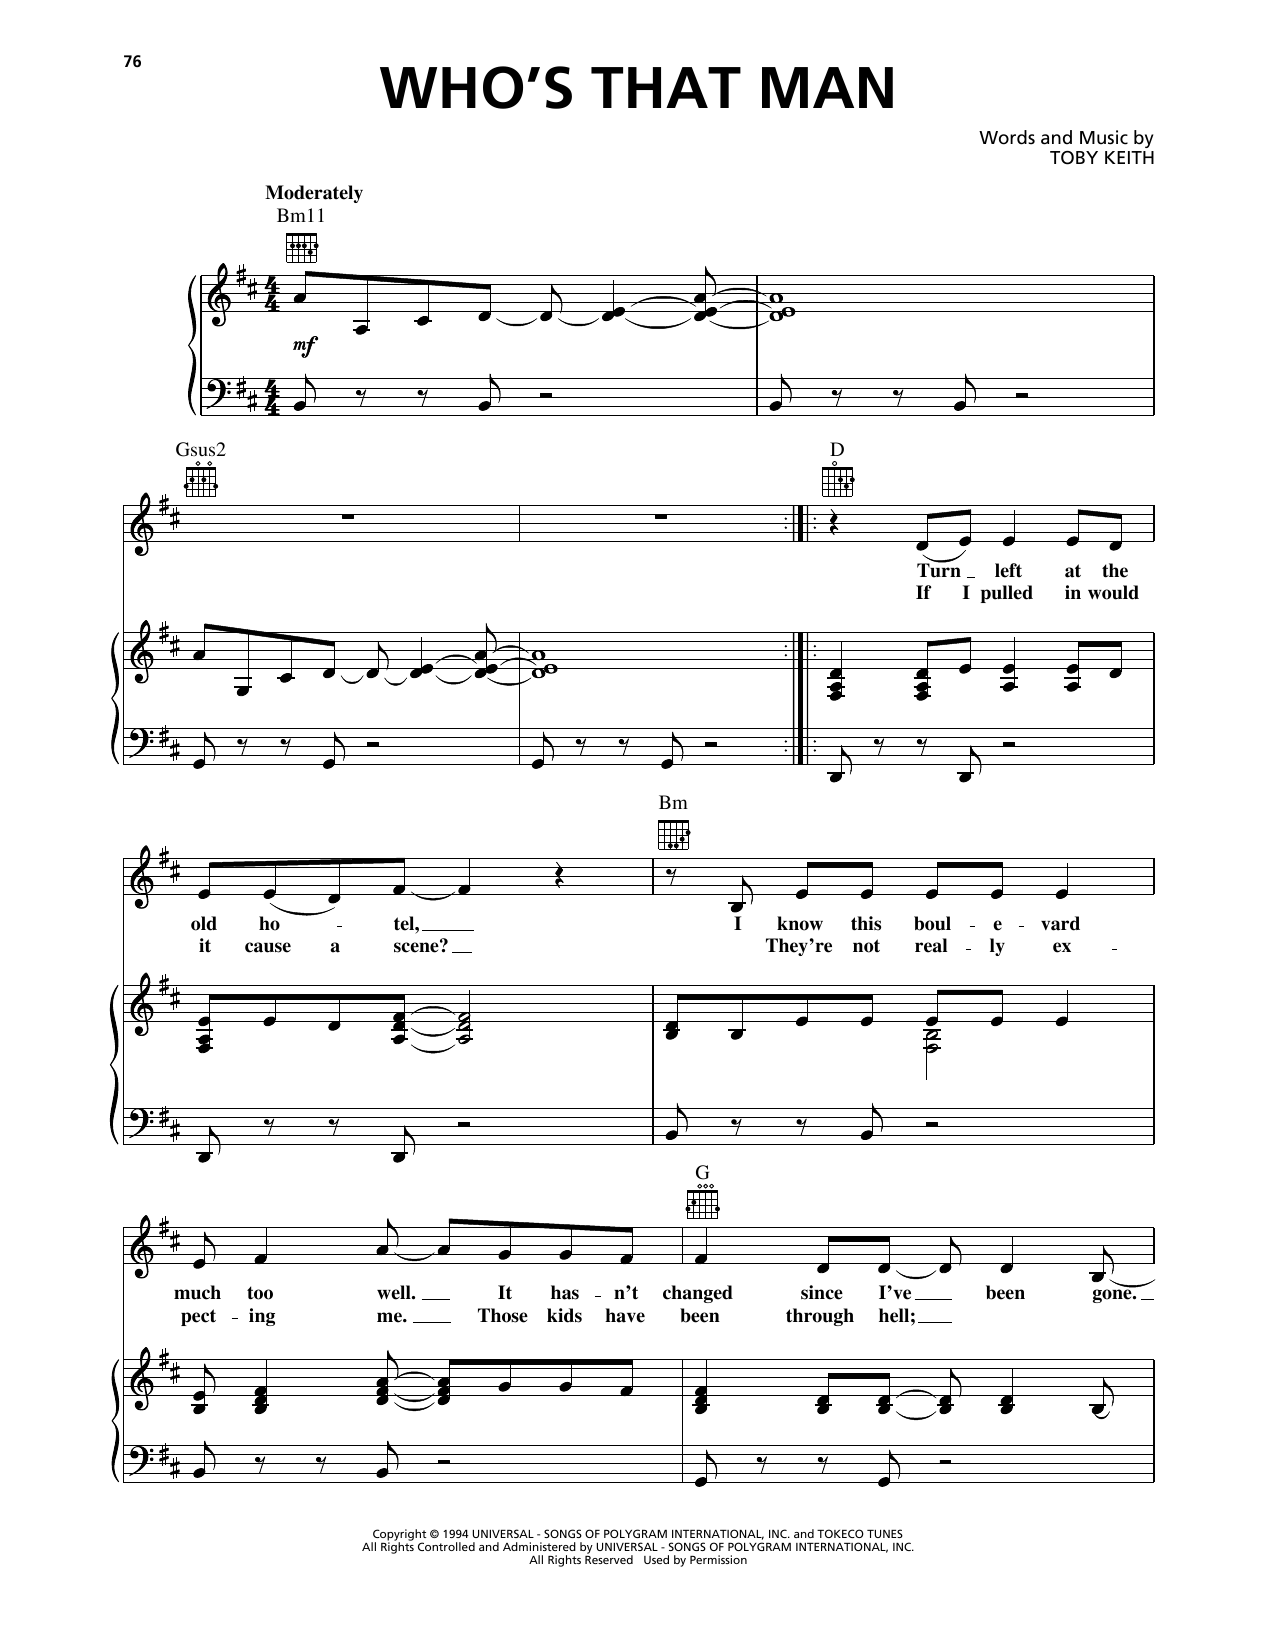 Download Toby Keith Who's That Man Sheet Music